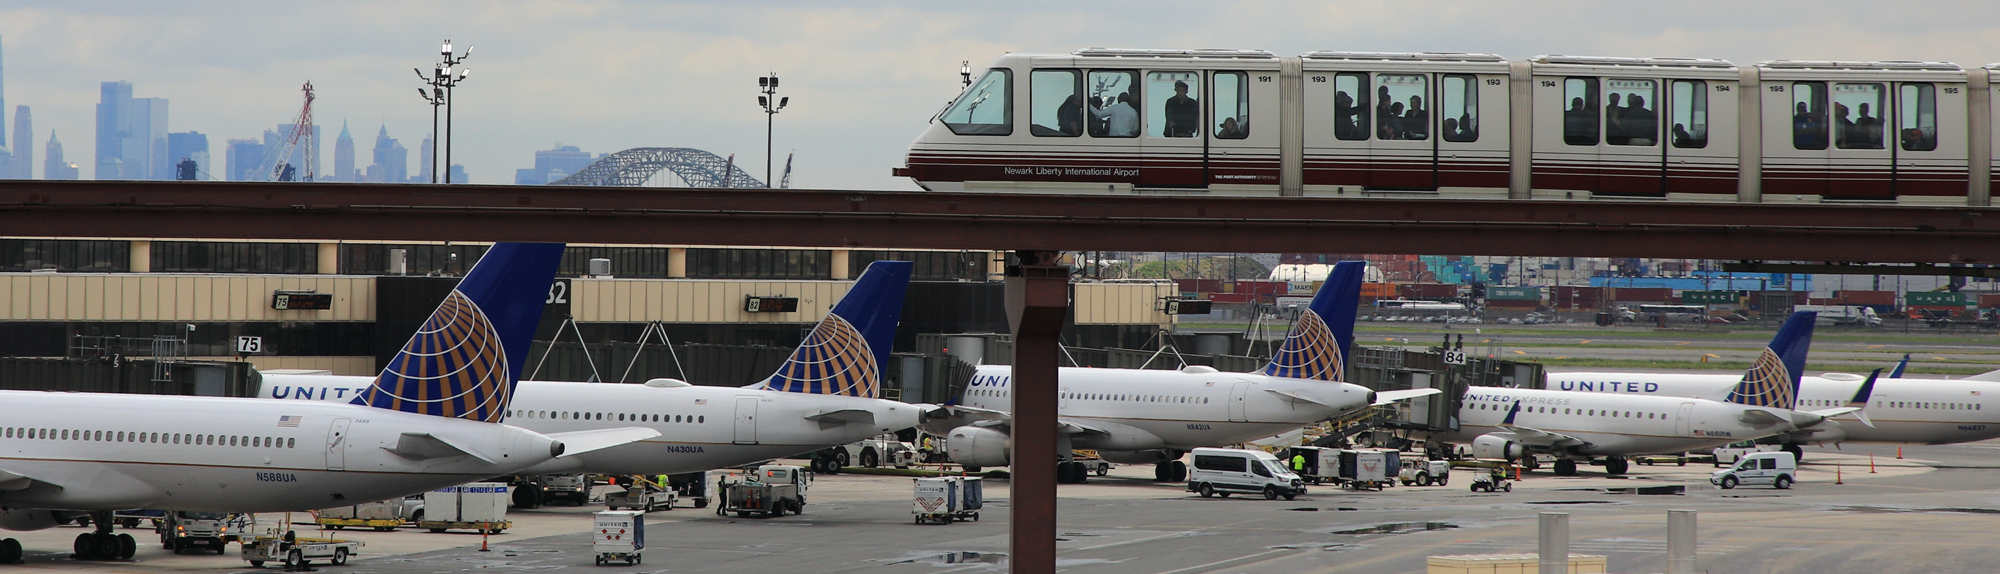 An AirTrain on an elevated track enters the frame on the right, with planes visible on the ground on the left. Newark Liberty International Airport is visible in the background.